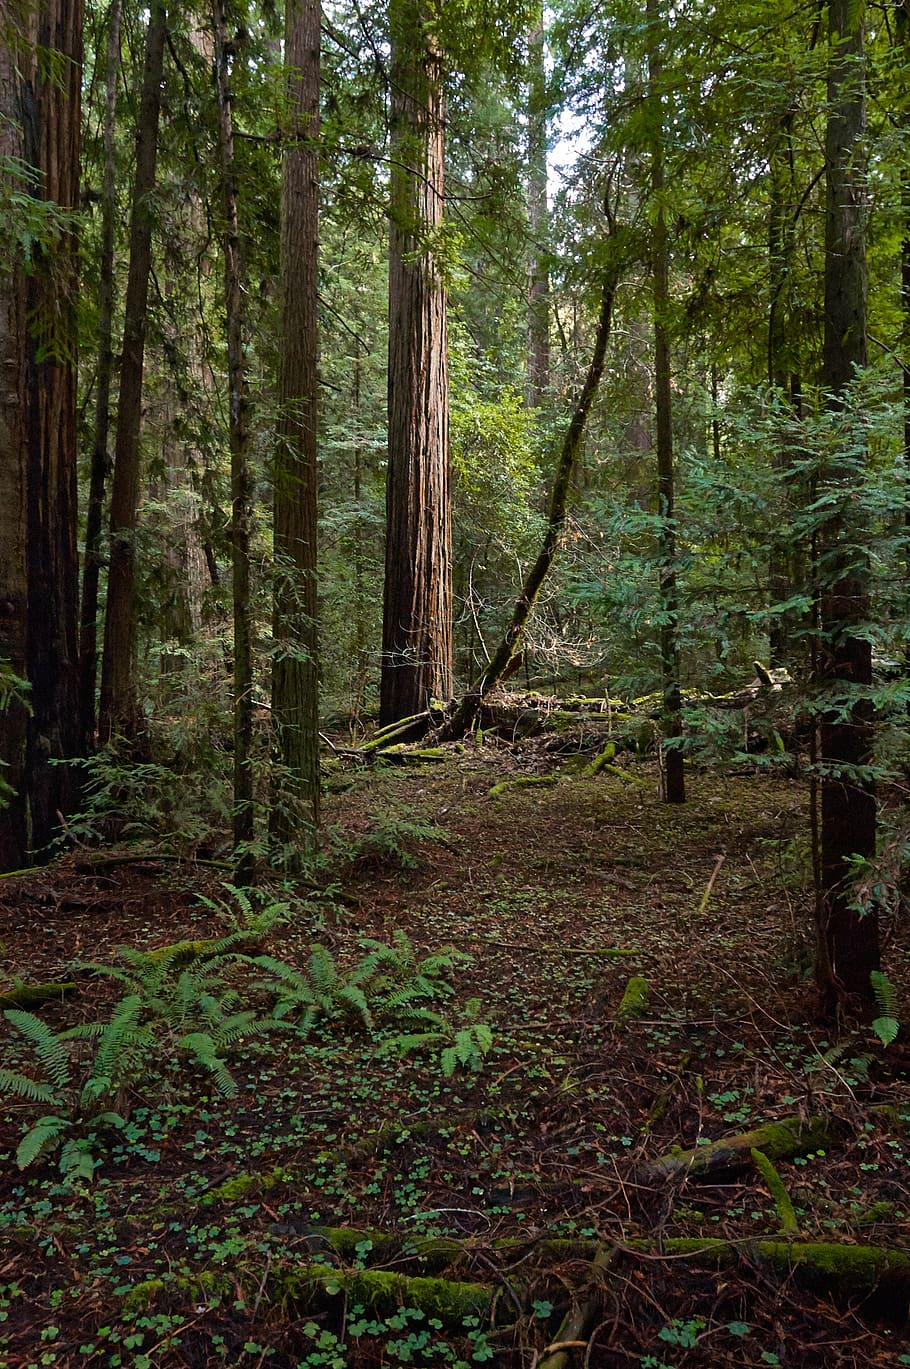 trees, forest, woods, nature, path, trail, branches, leaves, redwood, mossy